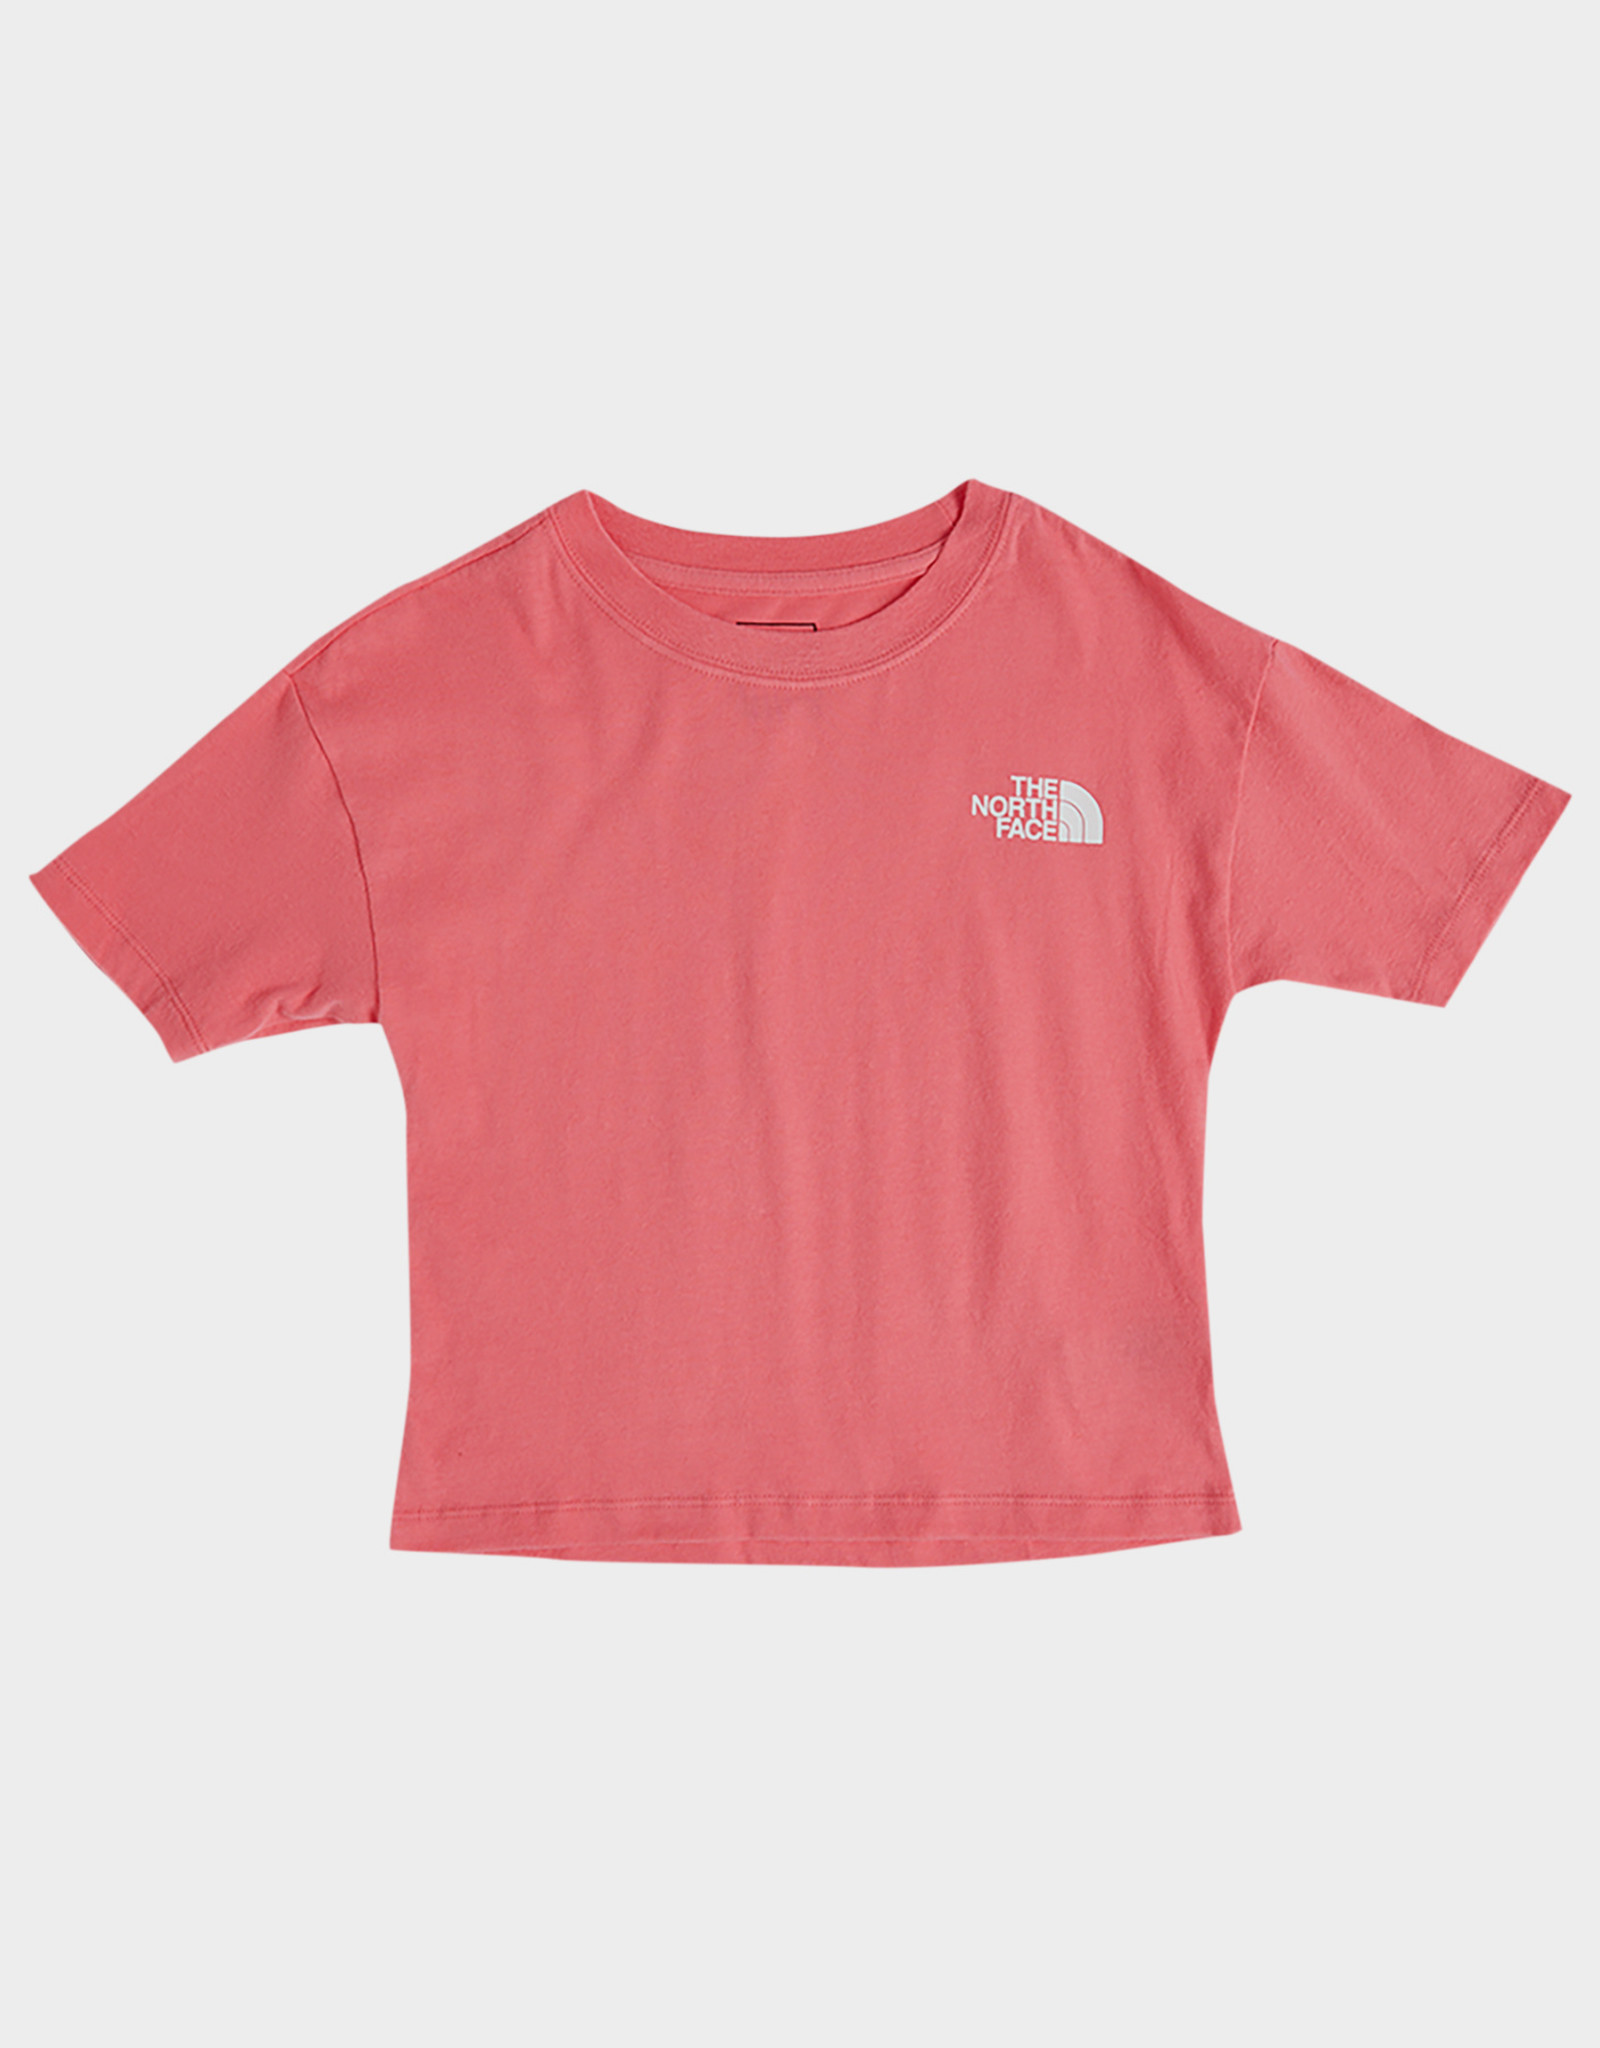 The North Face The North Face Girl's S/S Graphic Tee -S2021